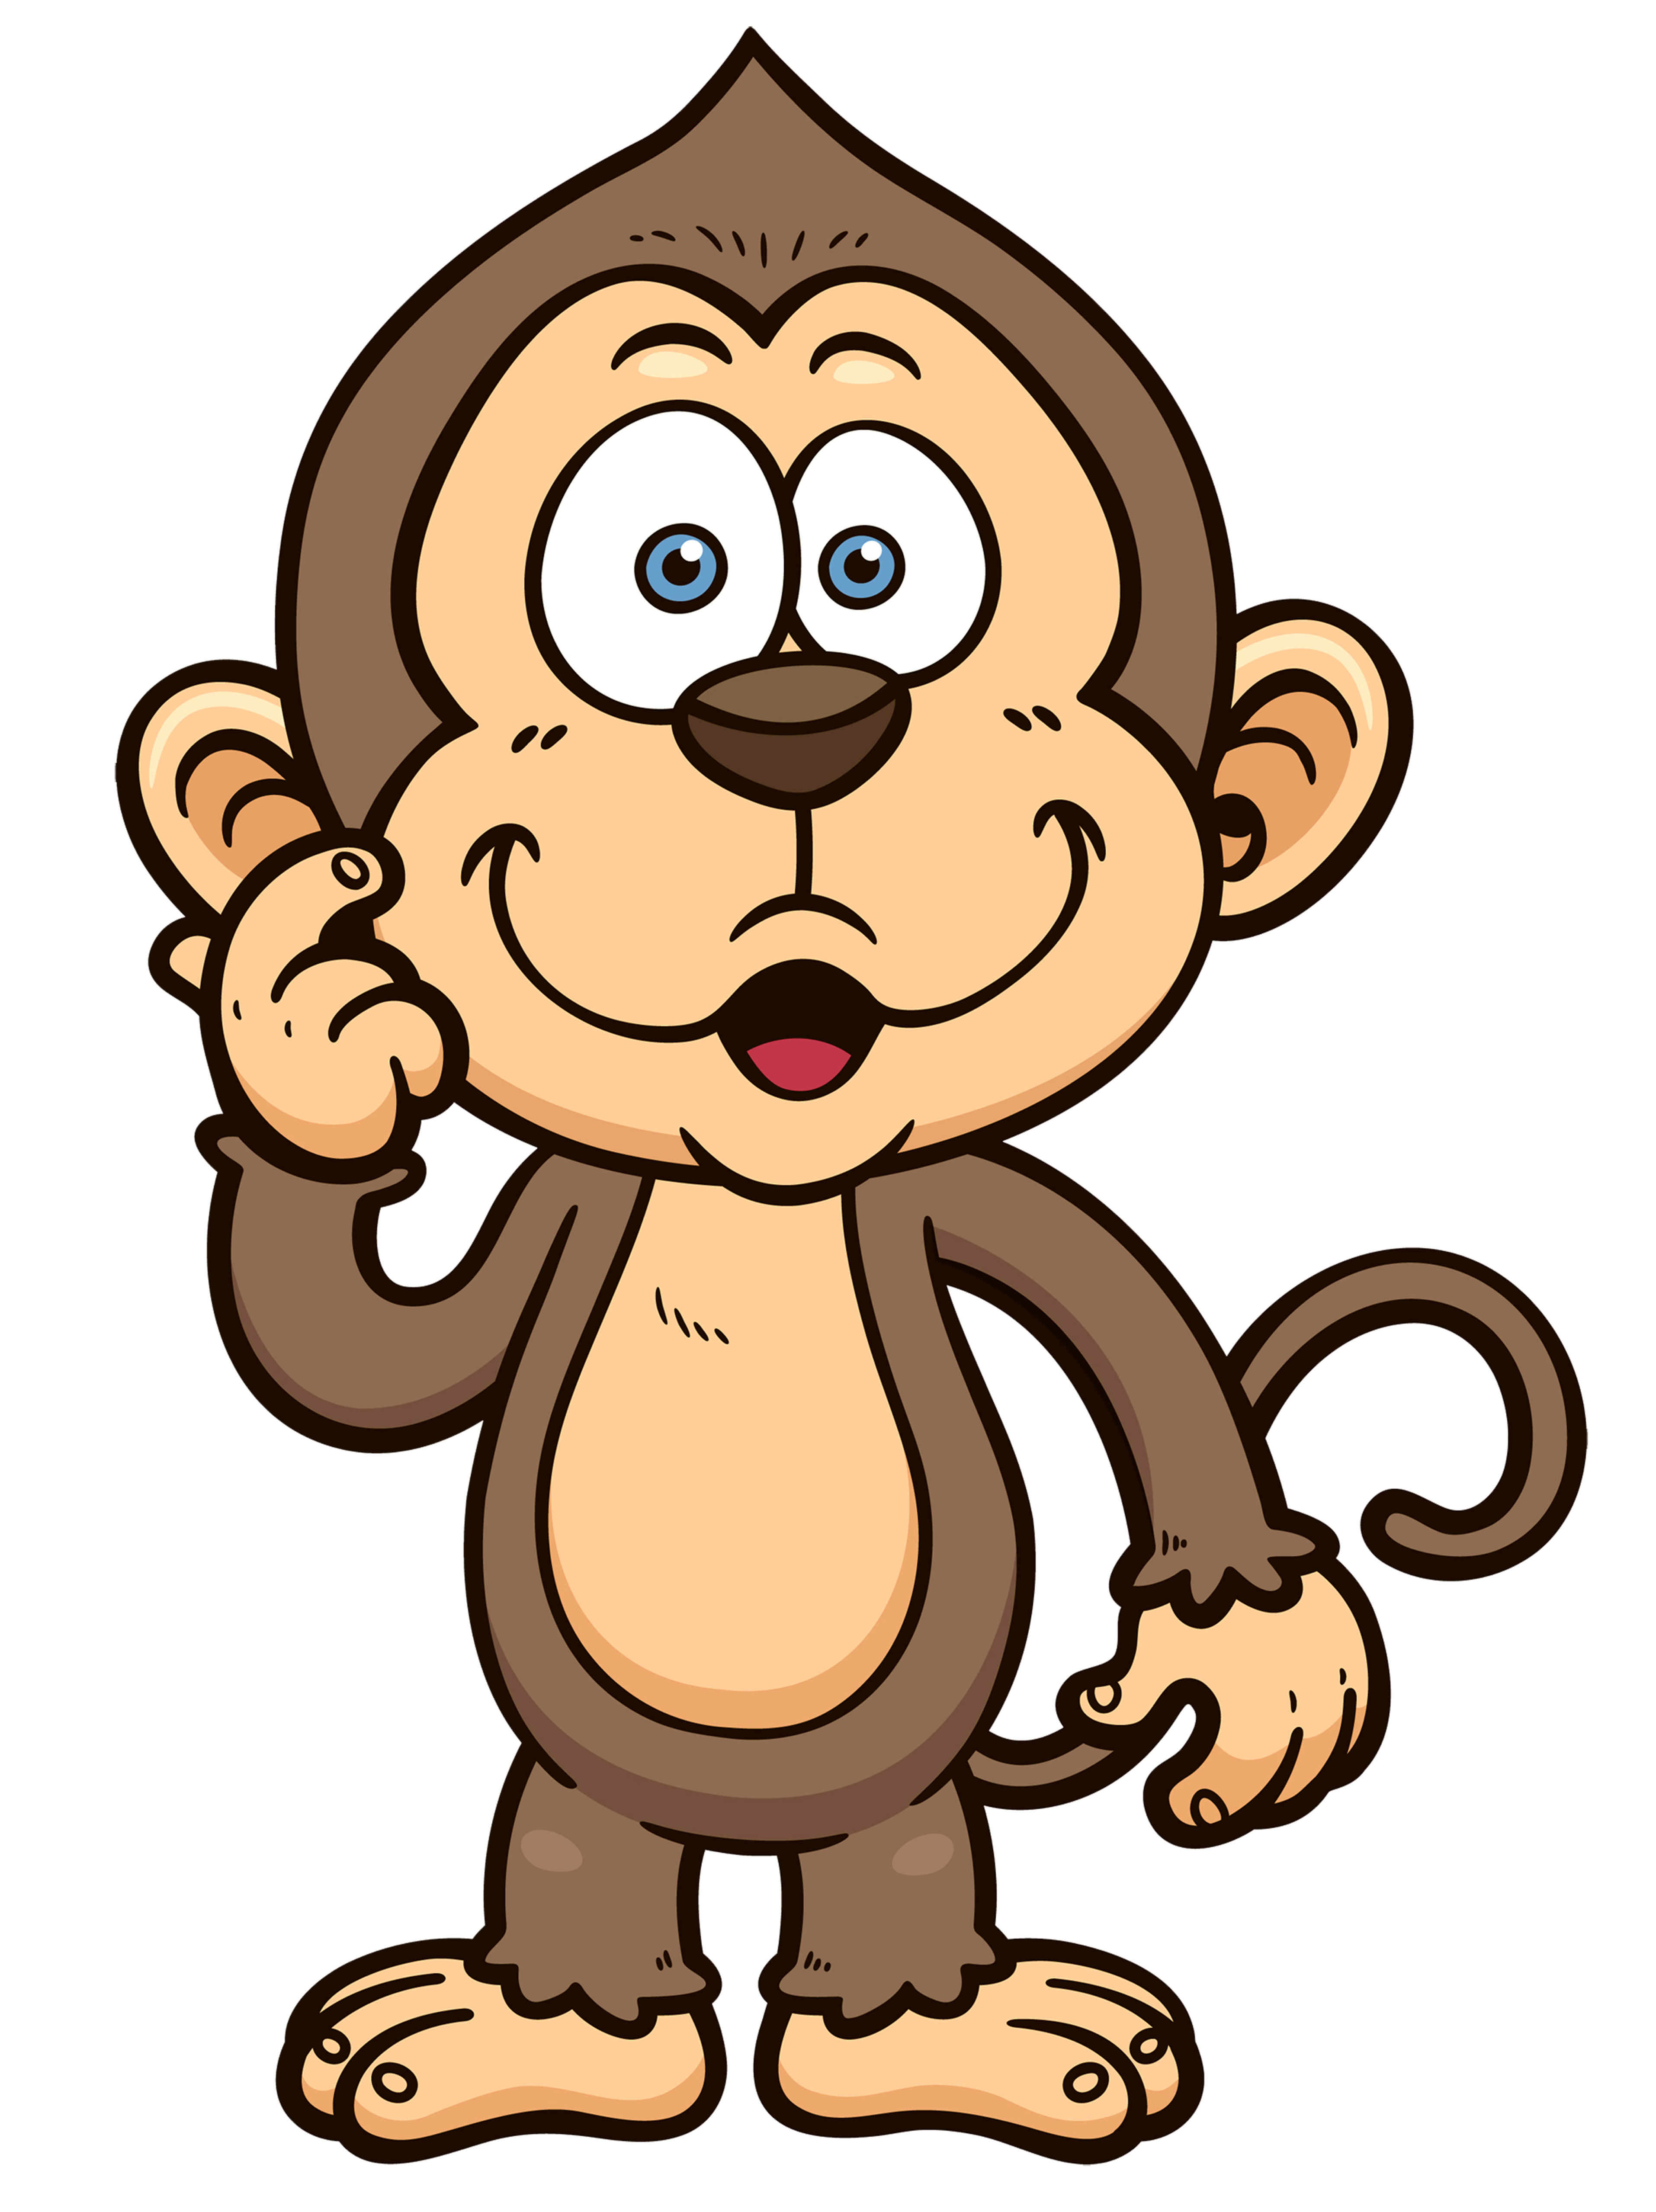 Monkey Cartoon PNG Clipart Image.